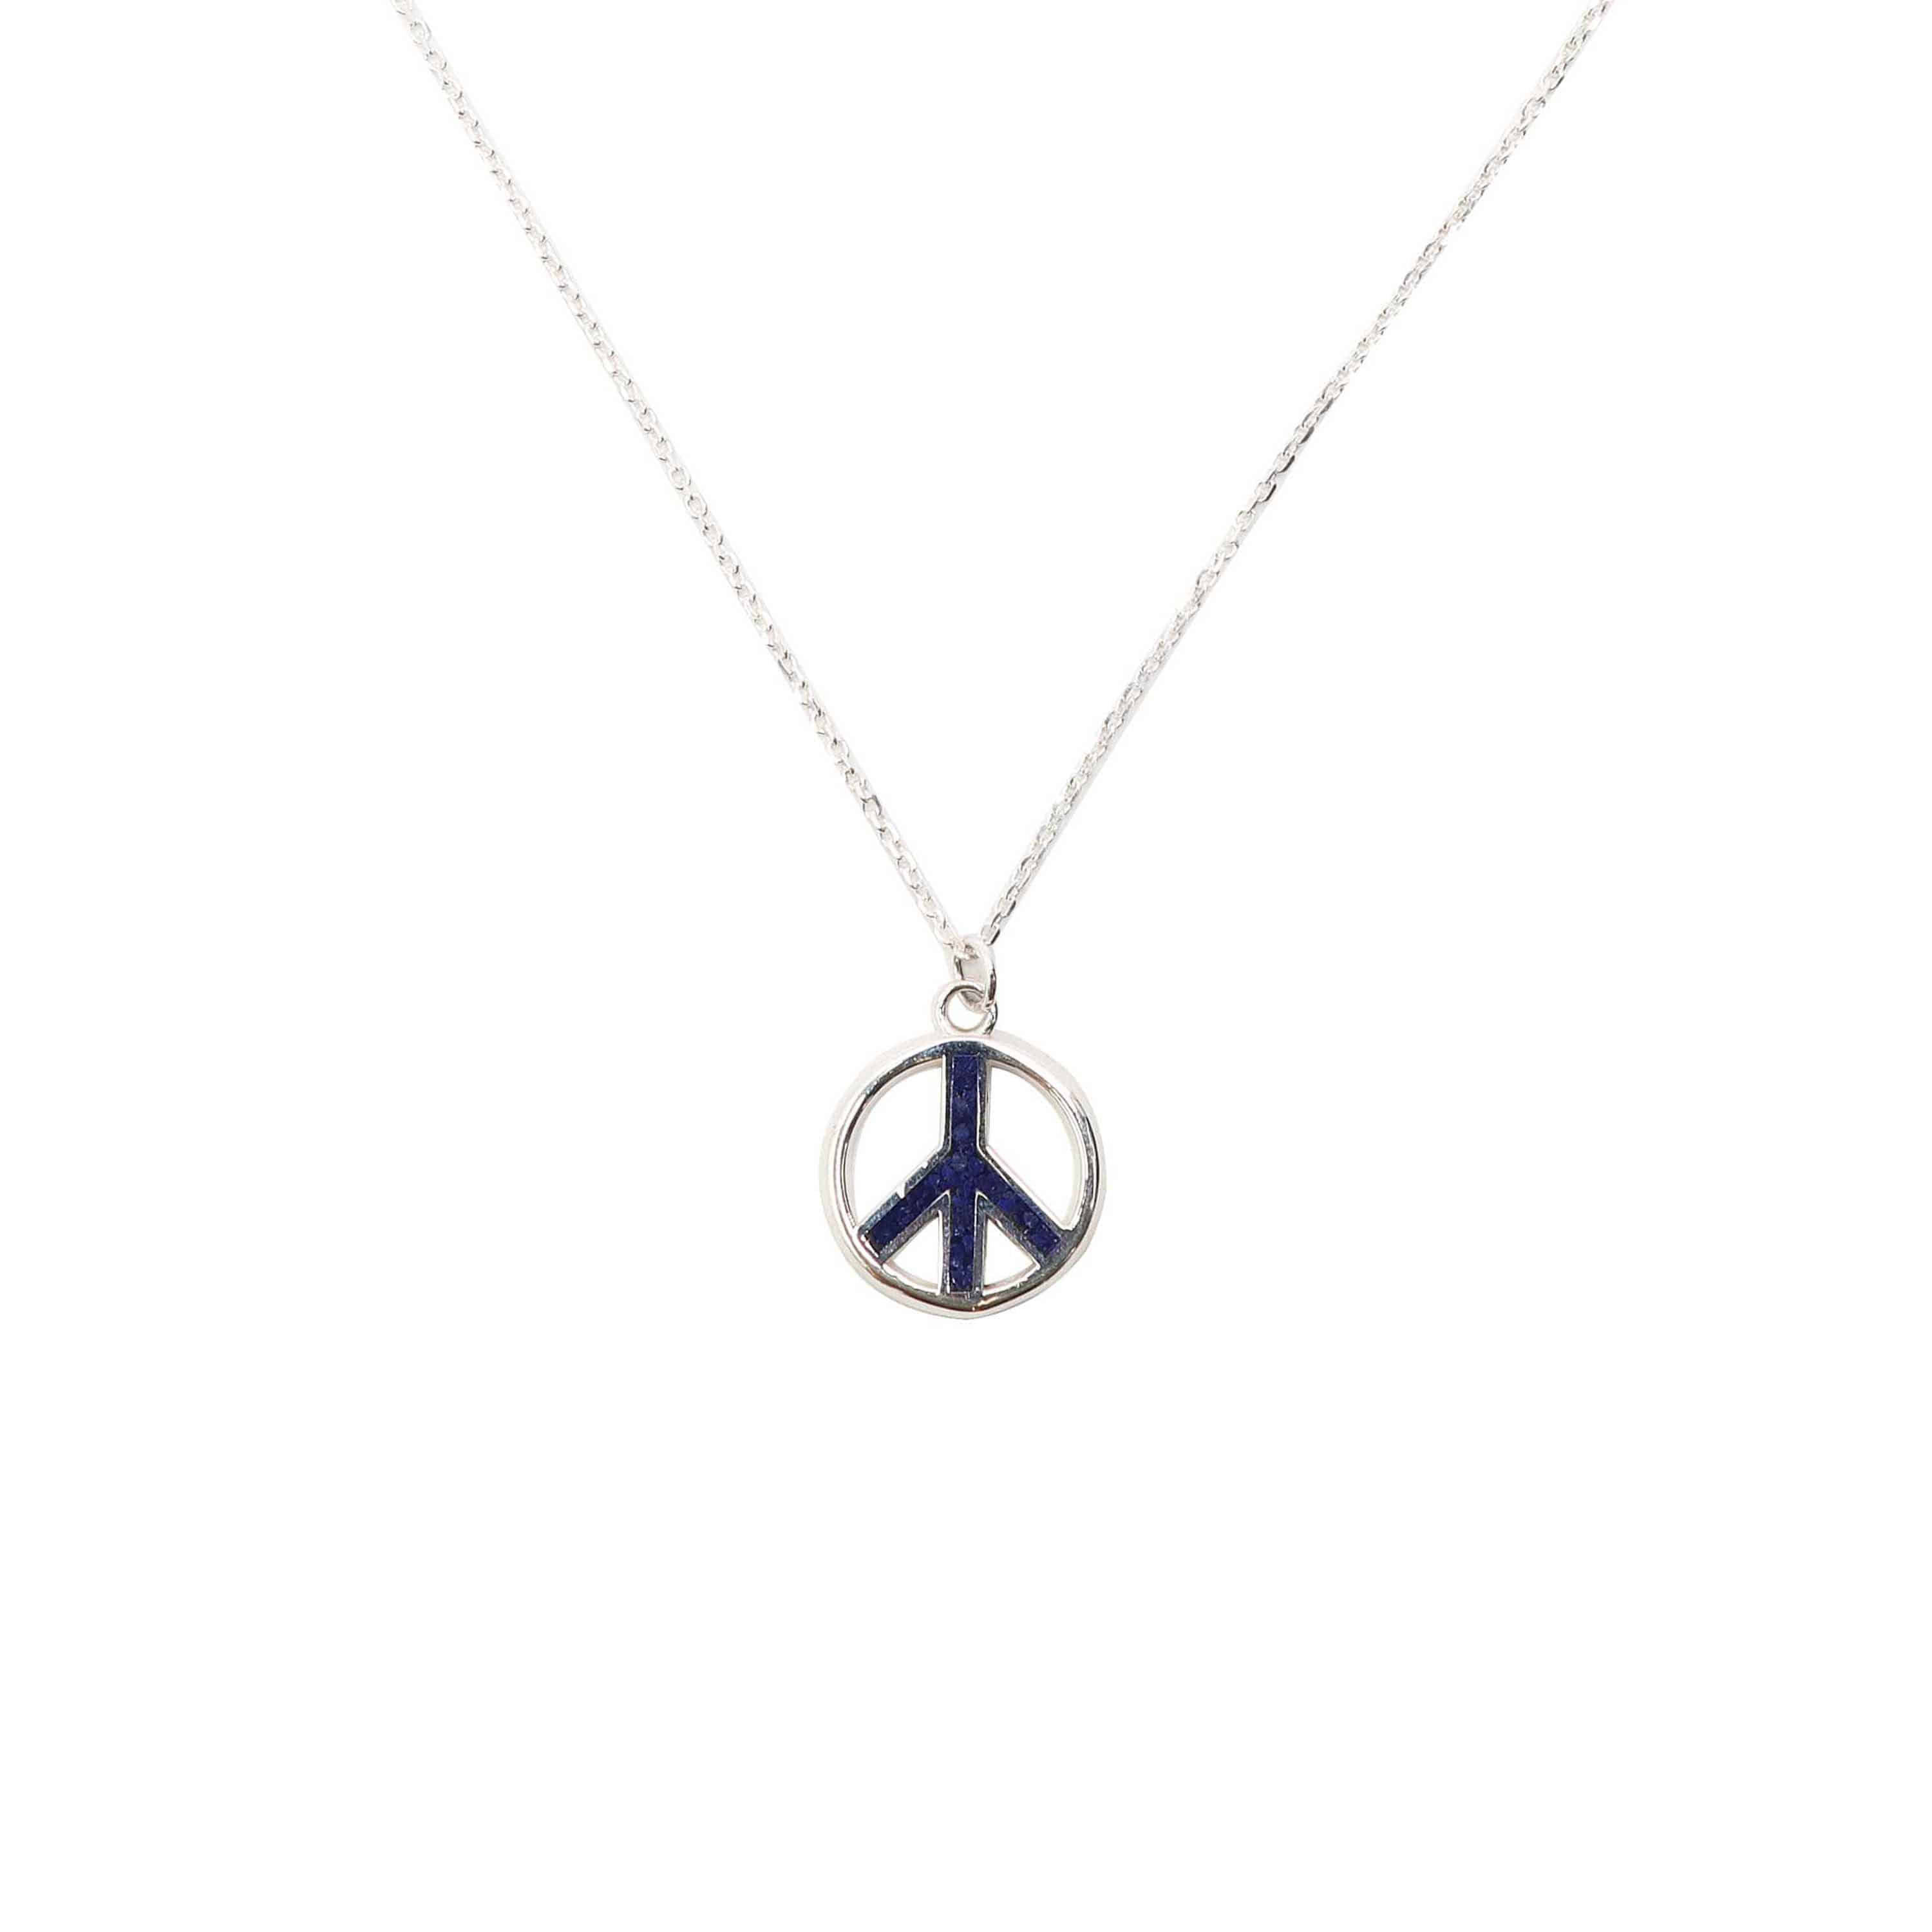 CALIFOLKS PEACE INLAY NECKLACE - LAPIS